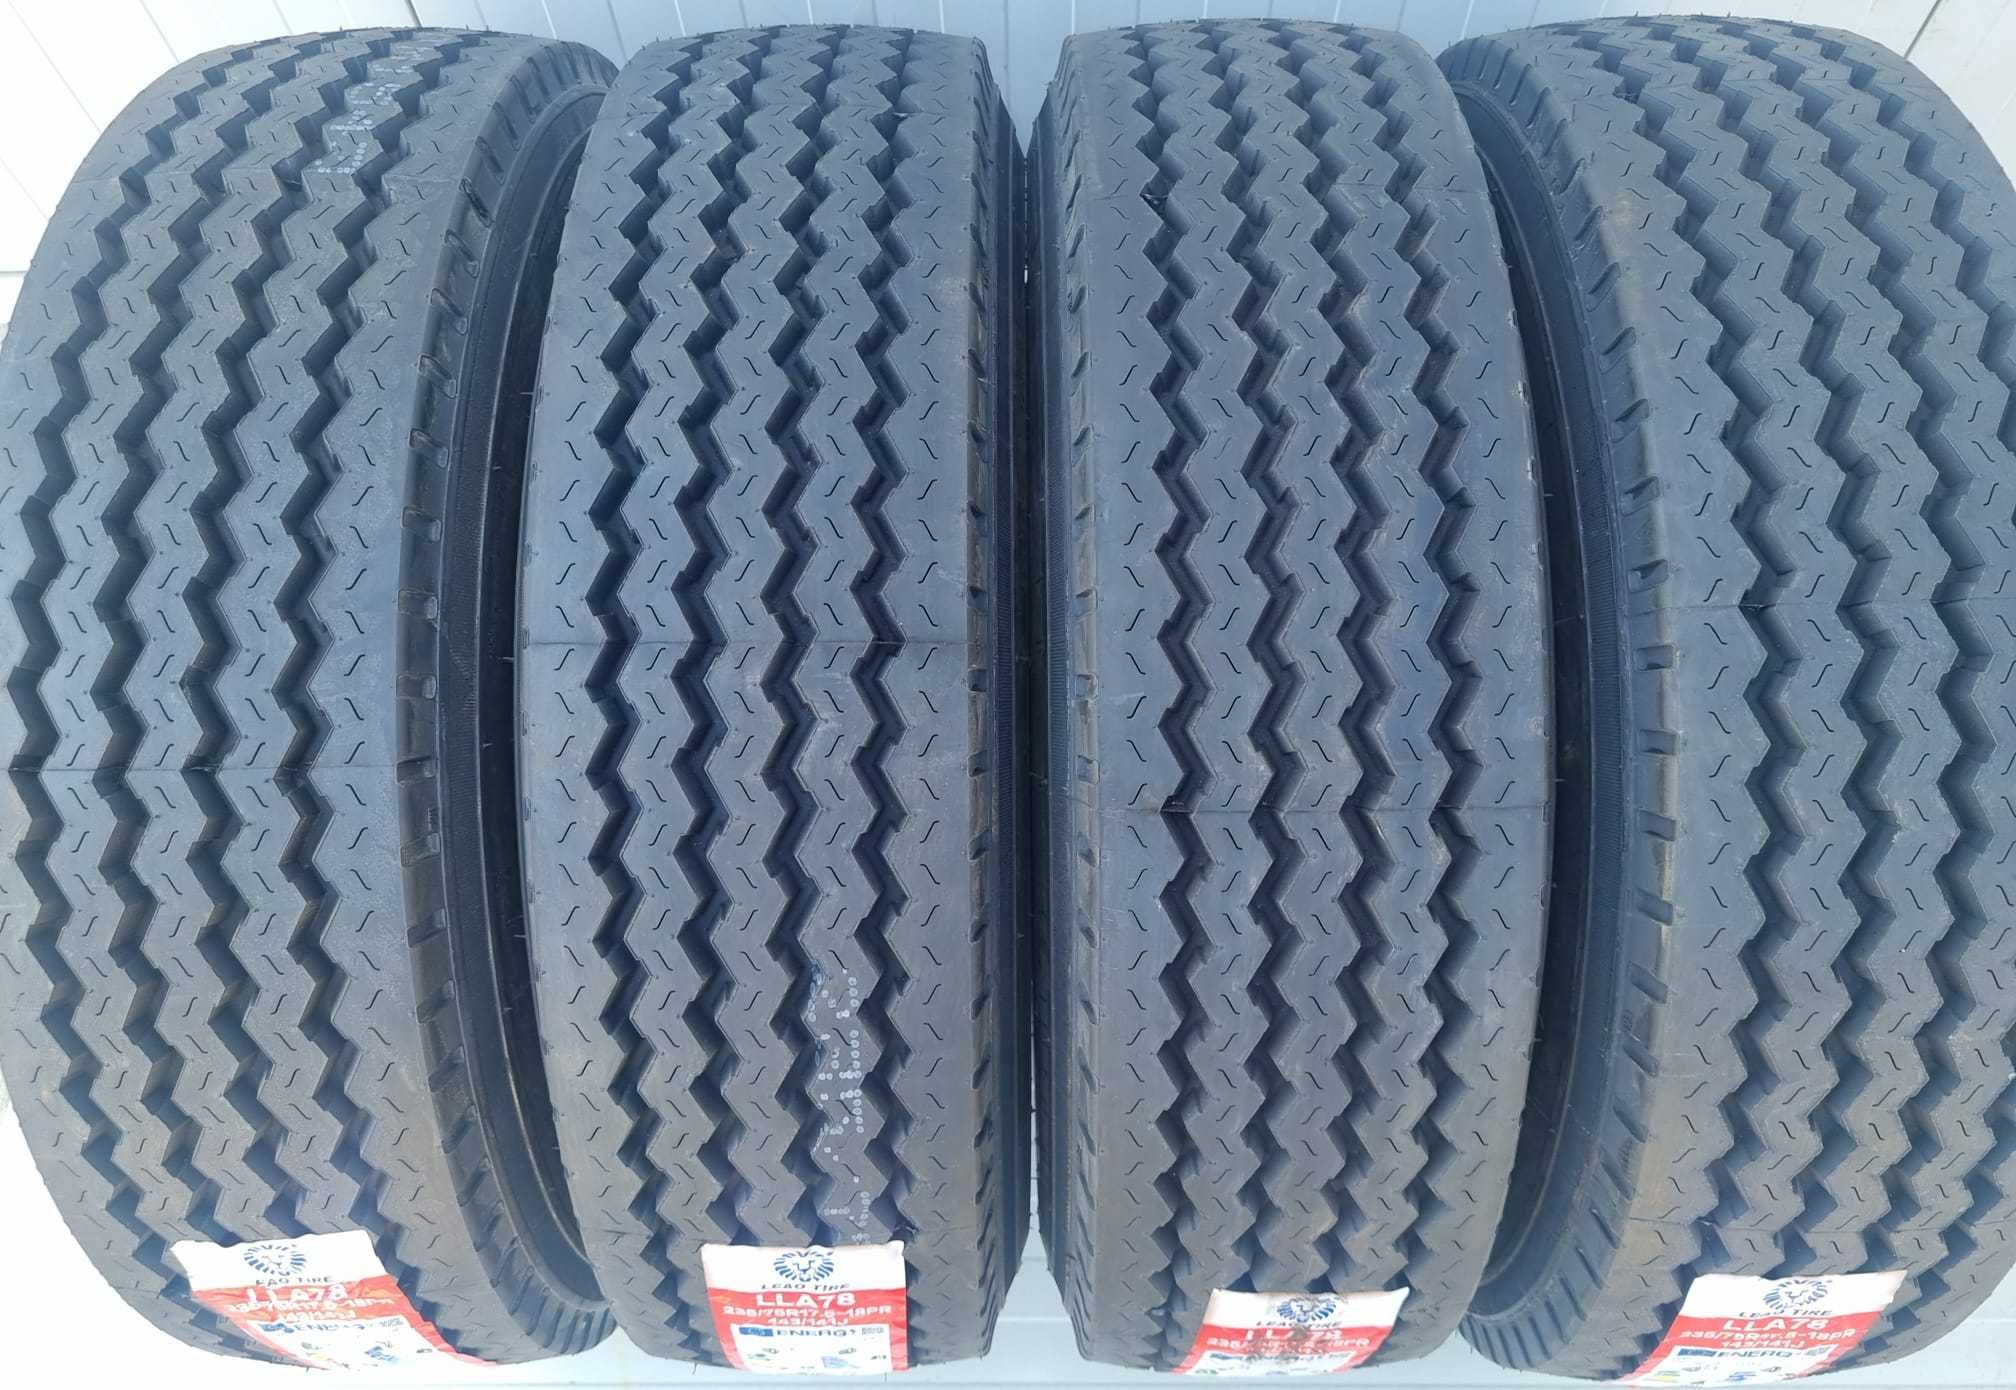 PROMO, 235/75 R17.5, 143/141J, LEAO, Anvelope toate axele M+S